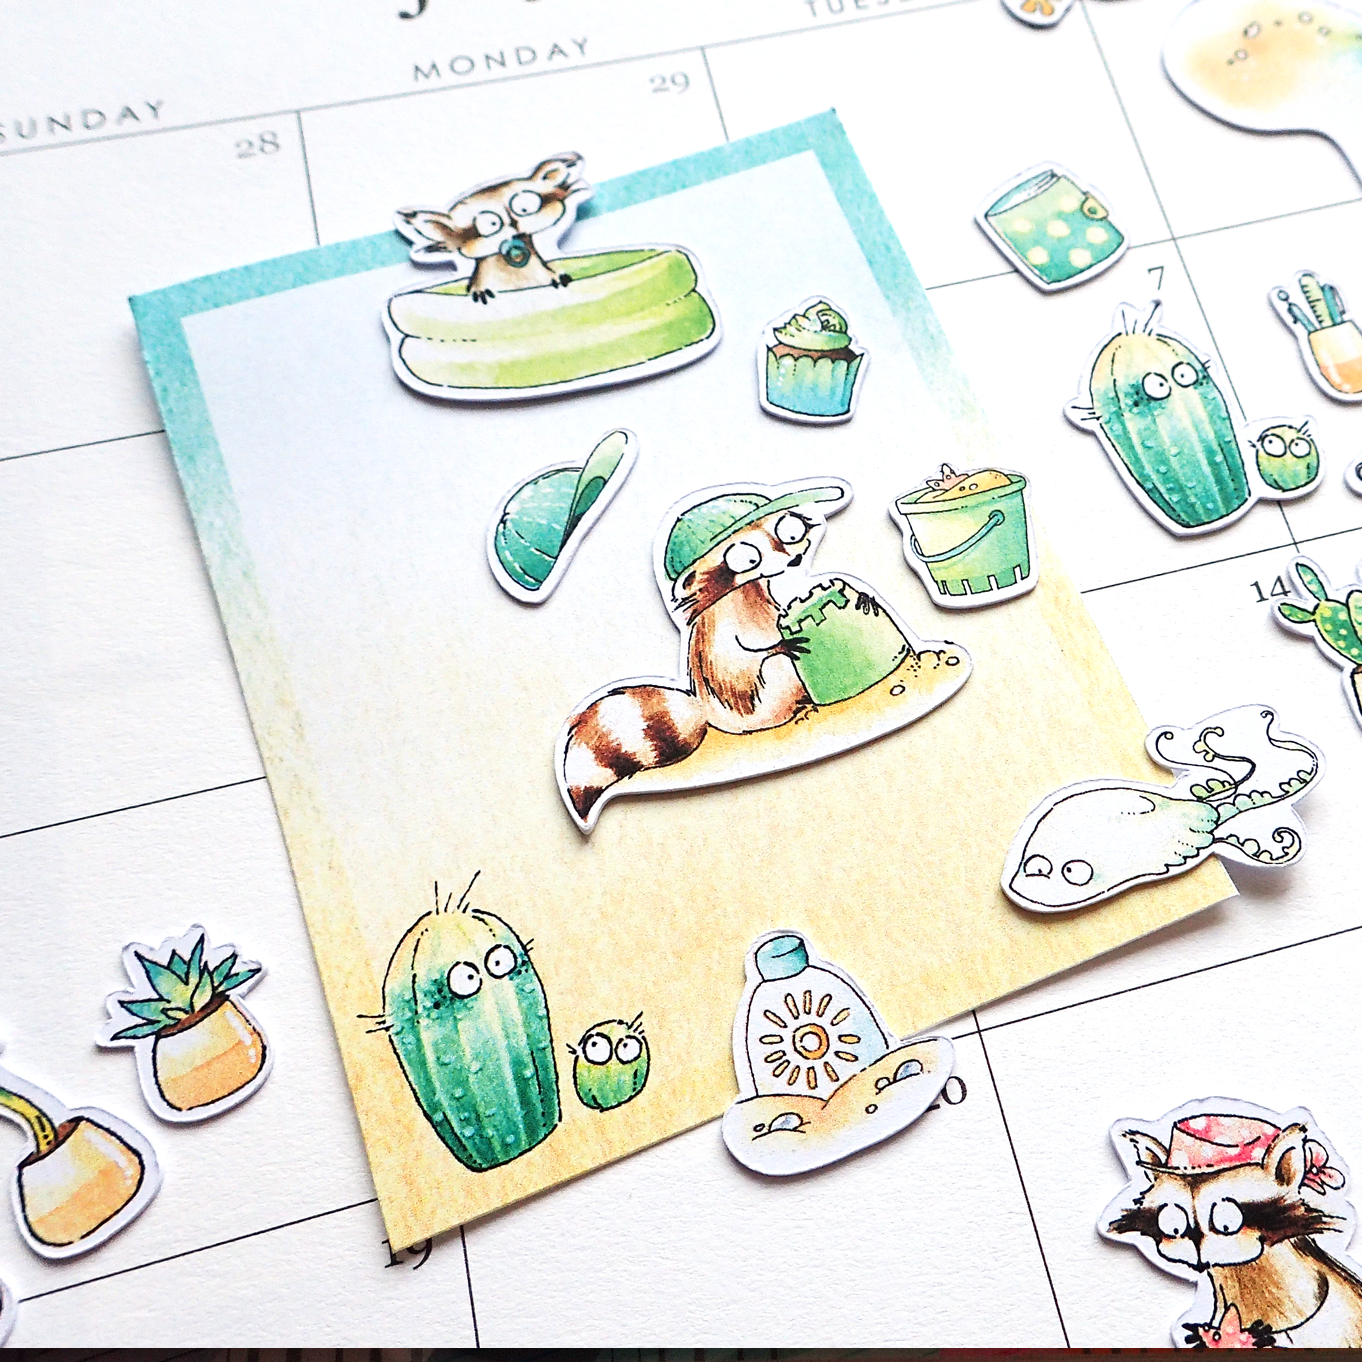 Playing In The Sand - 29 Watercolor Diecuts Including Raccoons, Cactus and Succulents